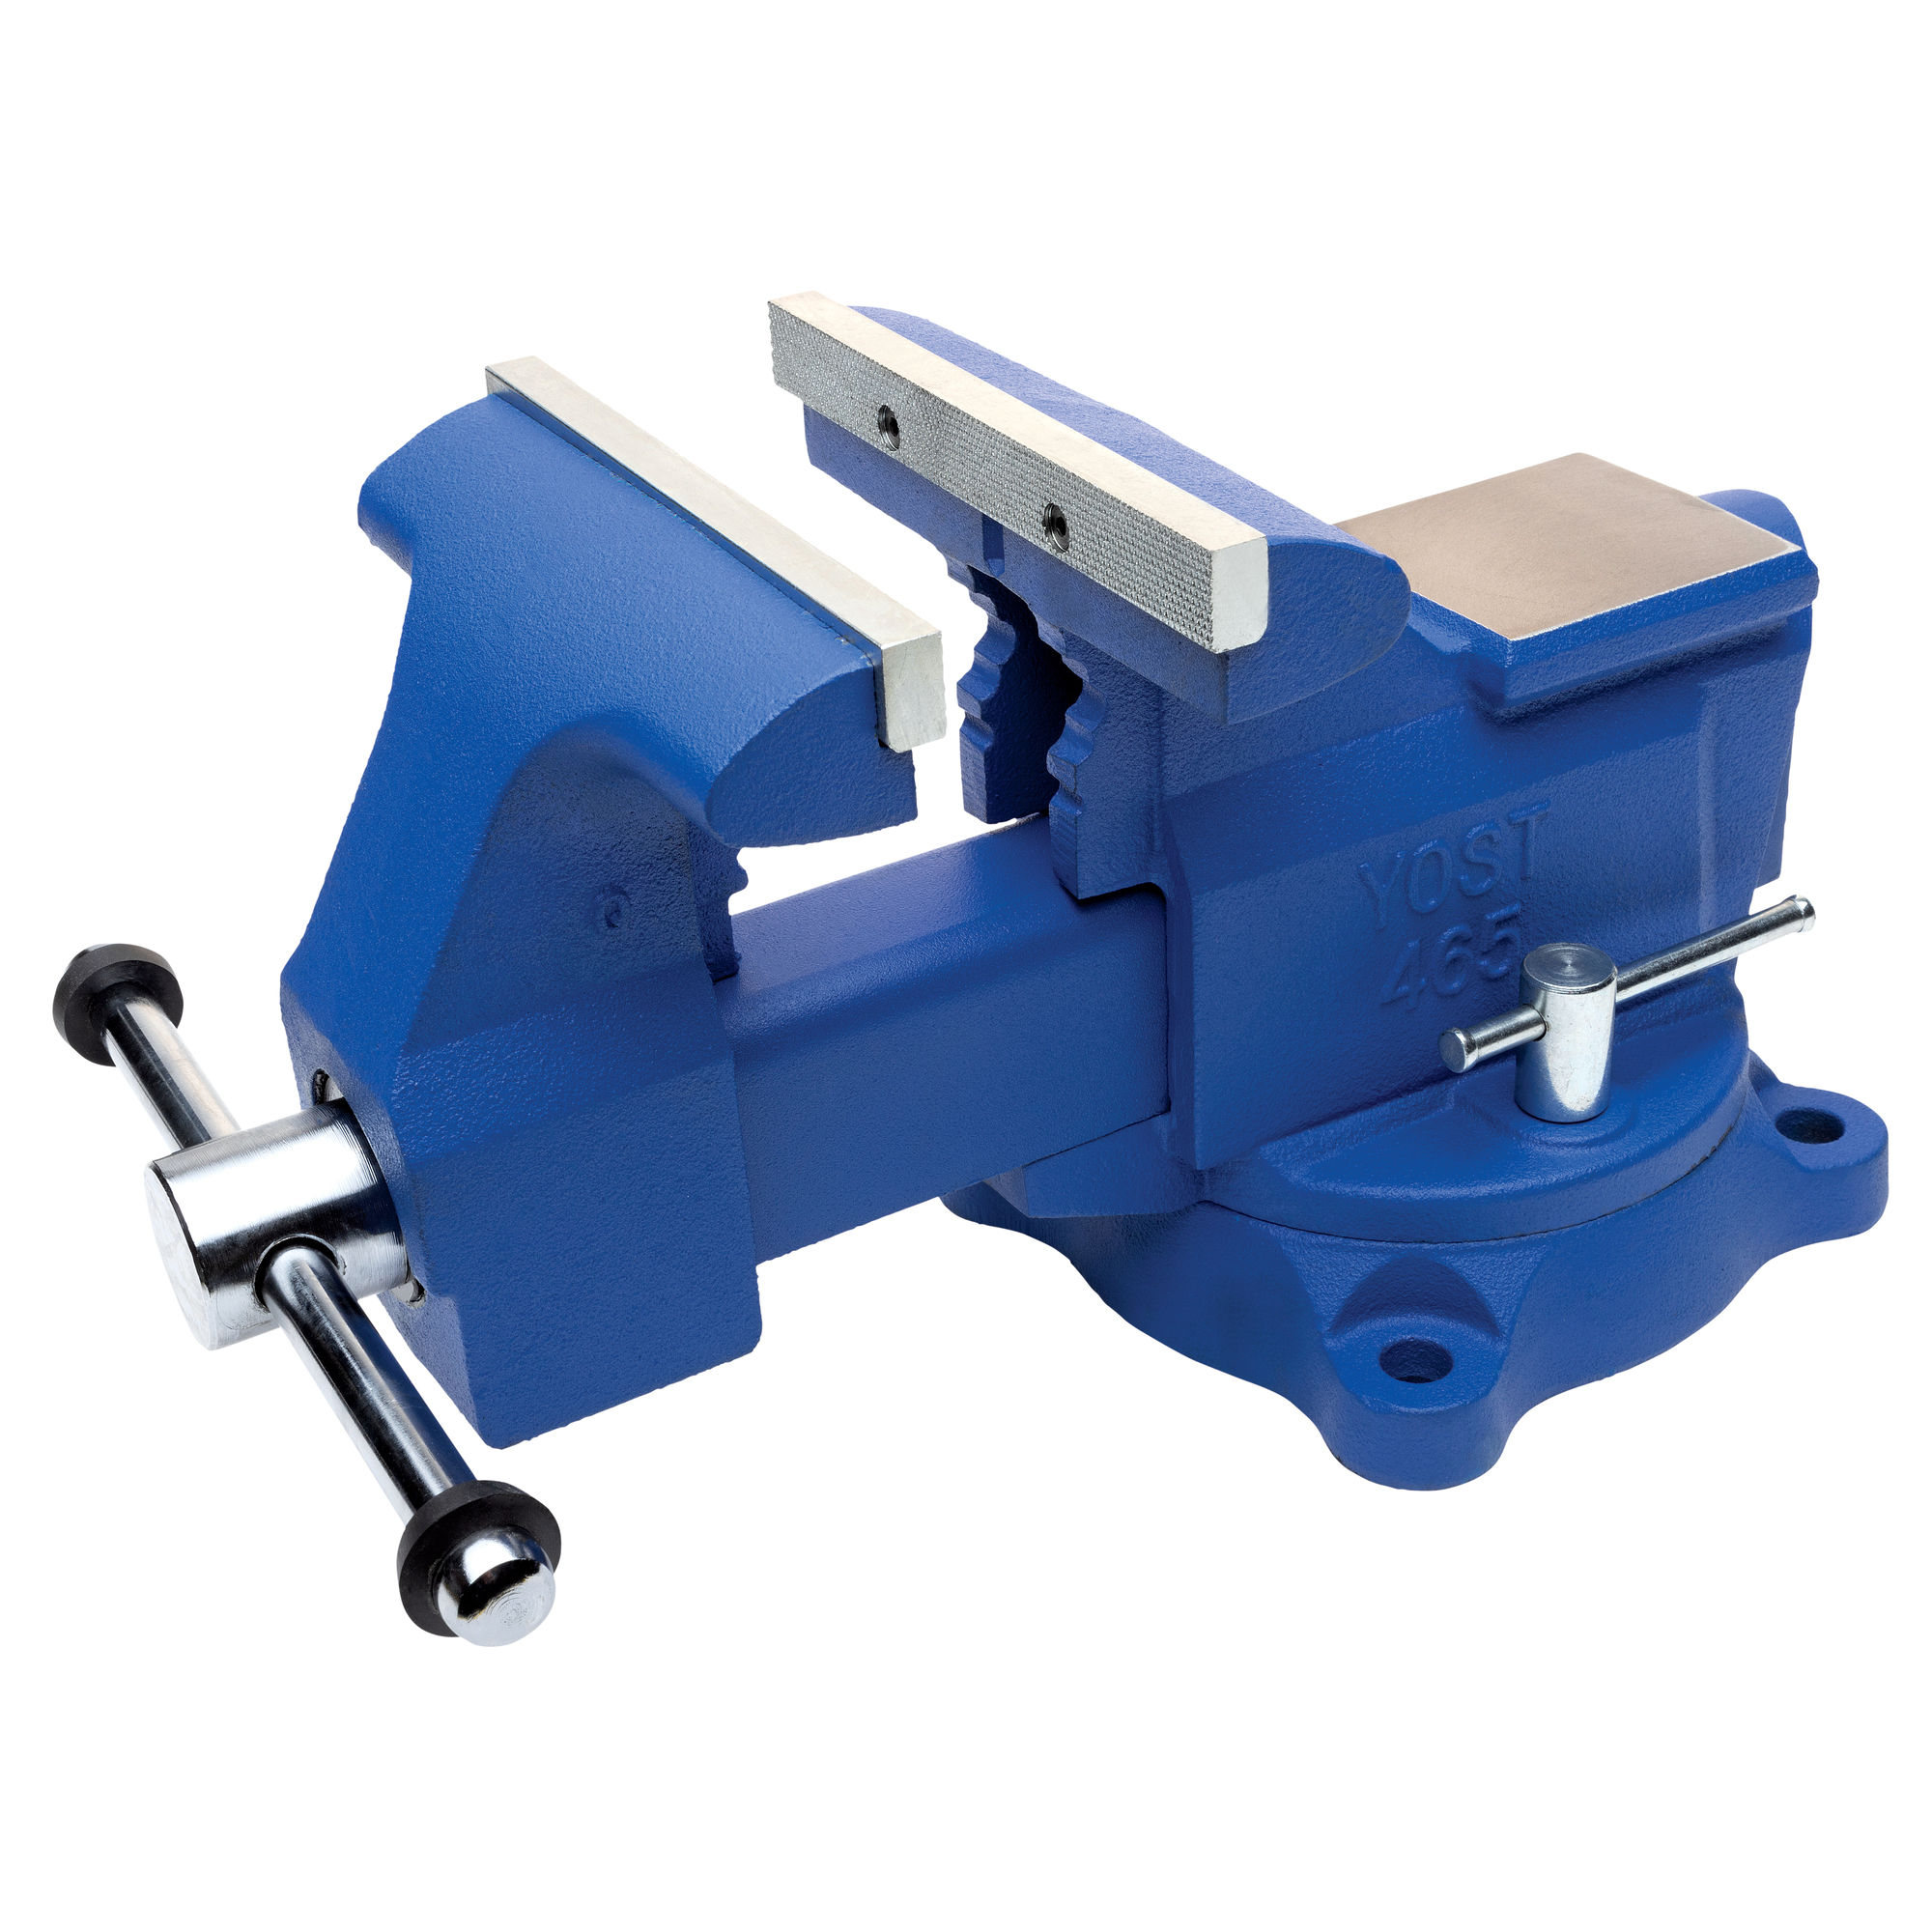 Yost Vises, 6.5Inch Utility Bench Vise, Jaw Width 6.5 in, Material Cast Iron, Model 465 -  56413